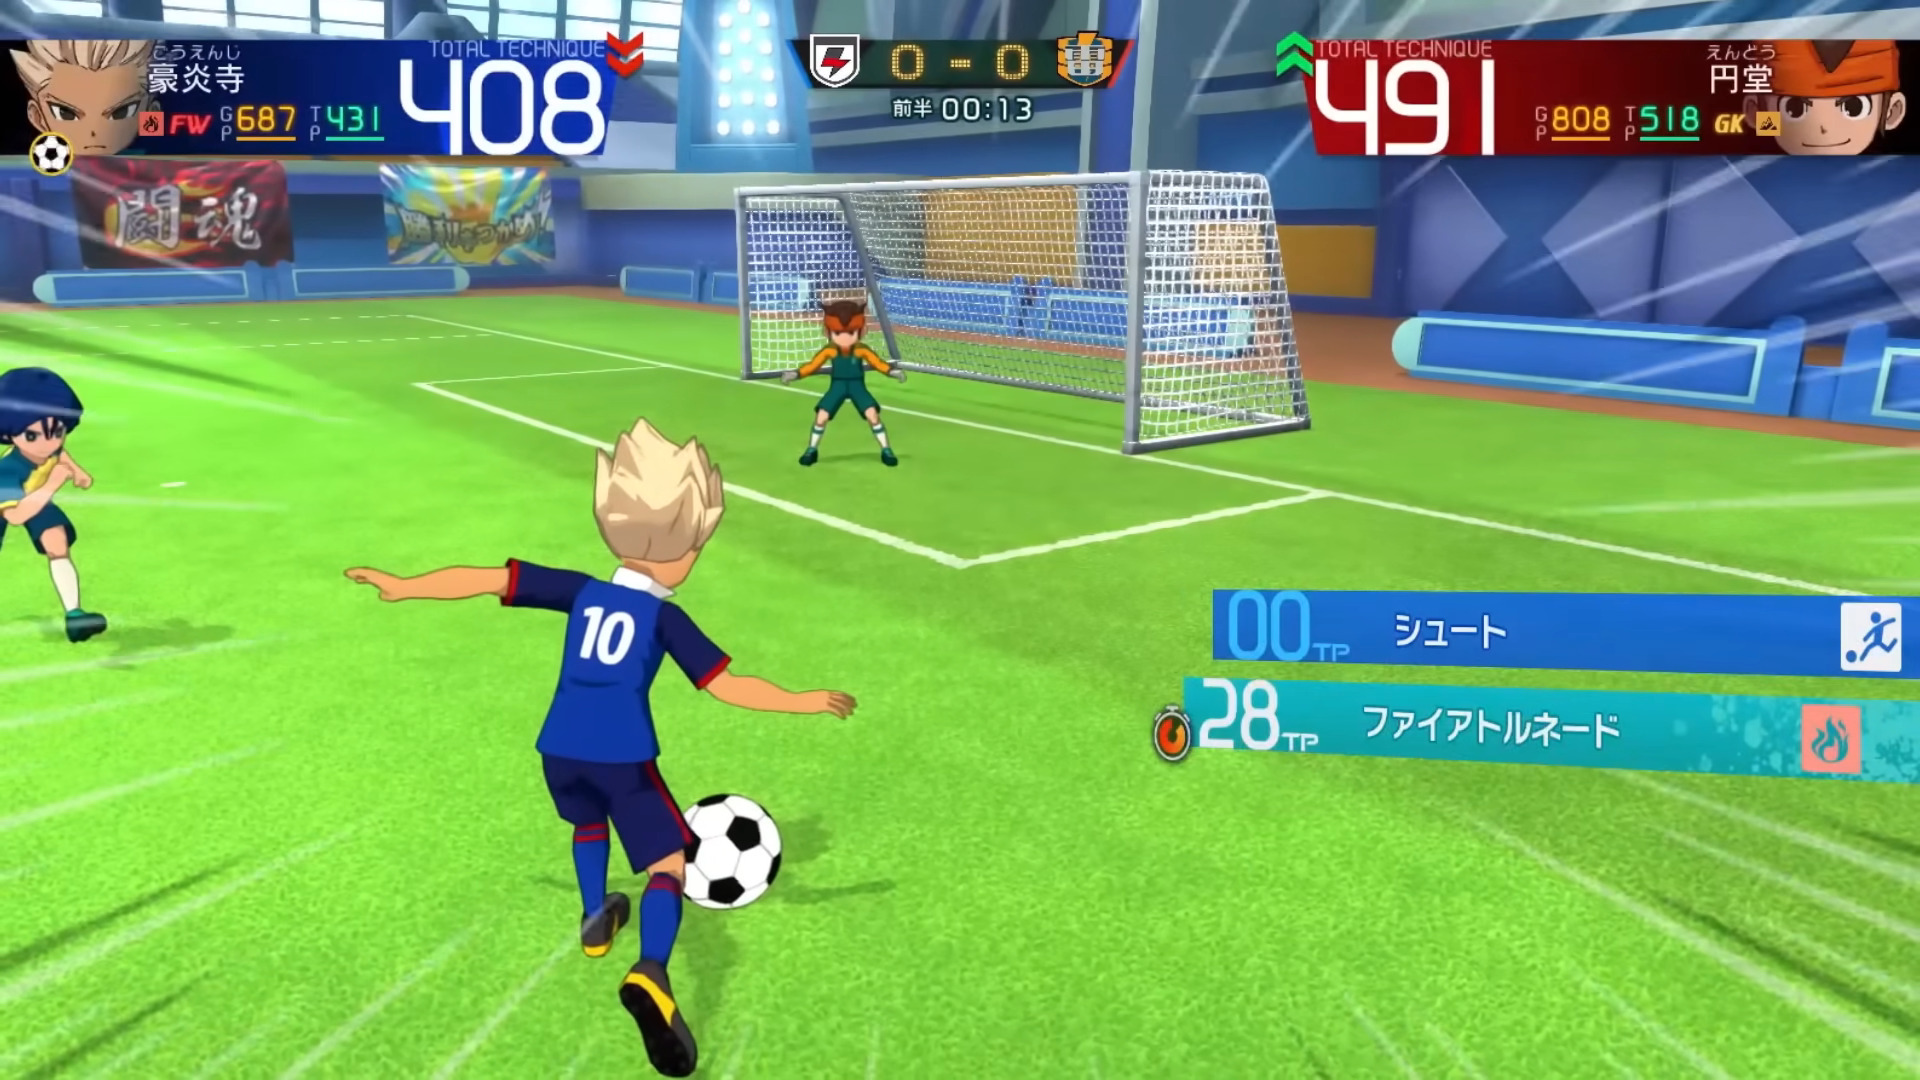 Inazuma Eleven: Great Road of Heroes title changed to Victory Road